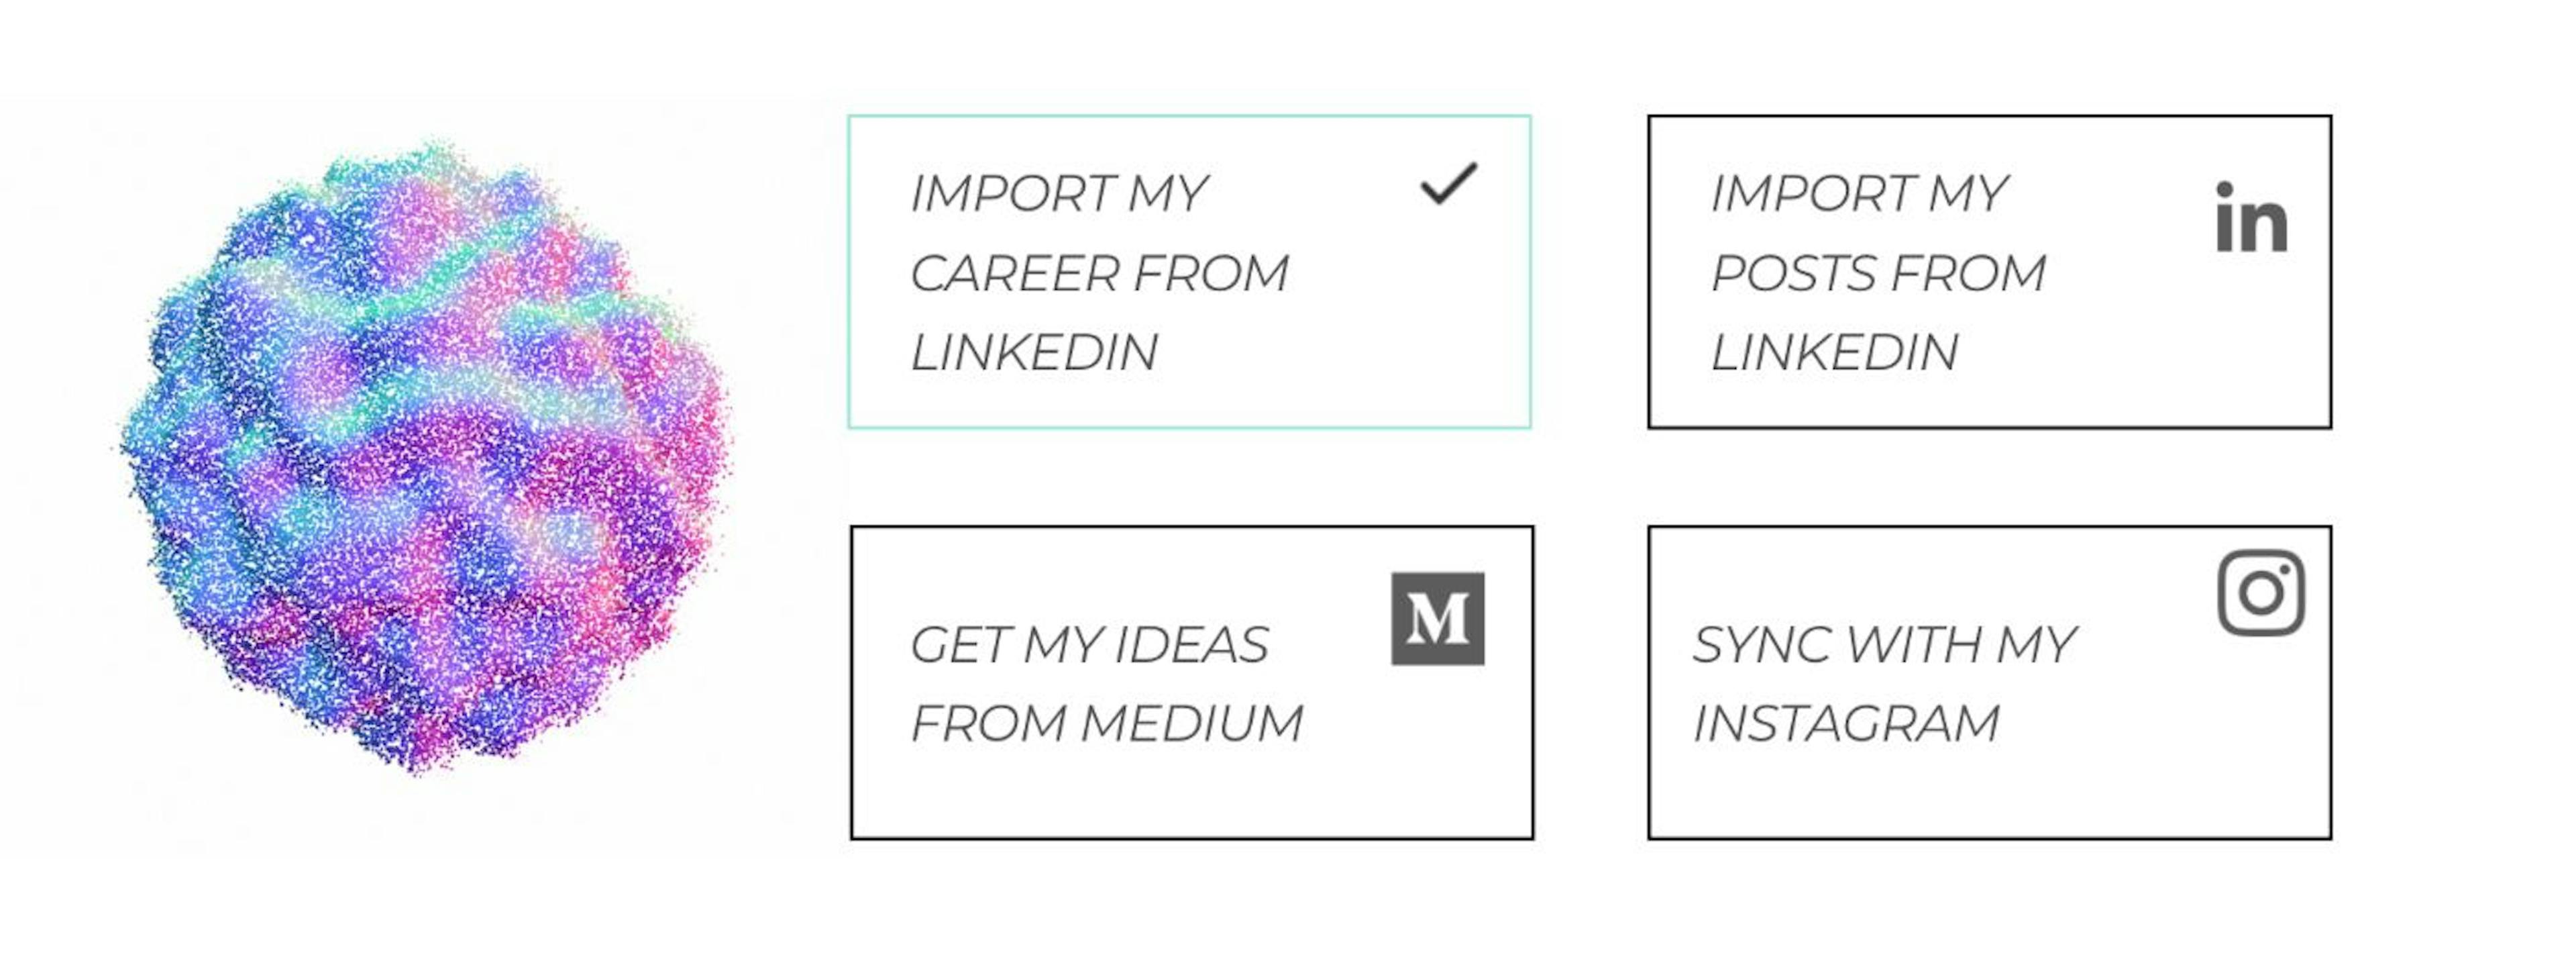 Spheria.ai has cute little modules to import from my LinkedIn, my Instagram, import from Medium...